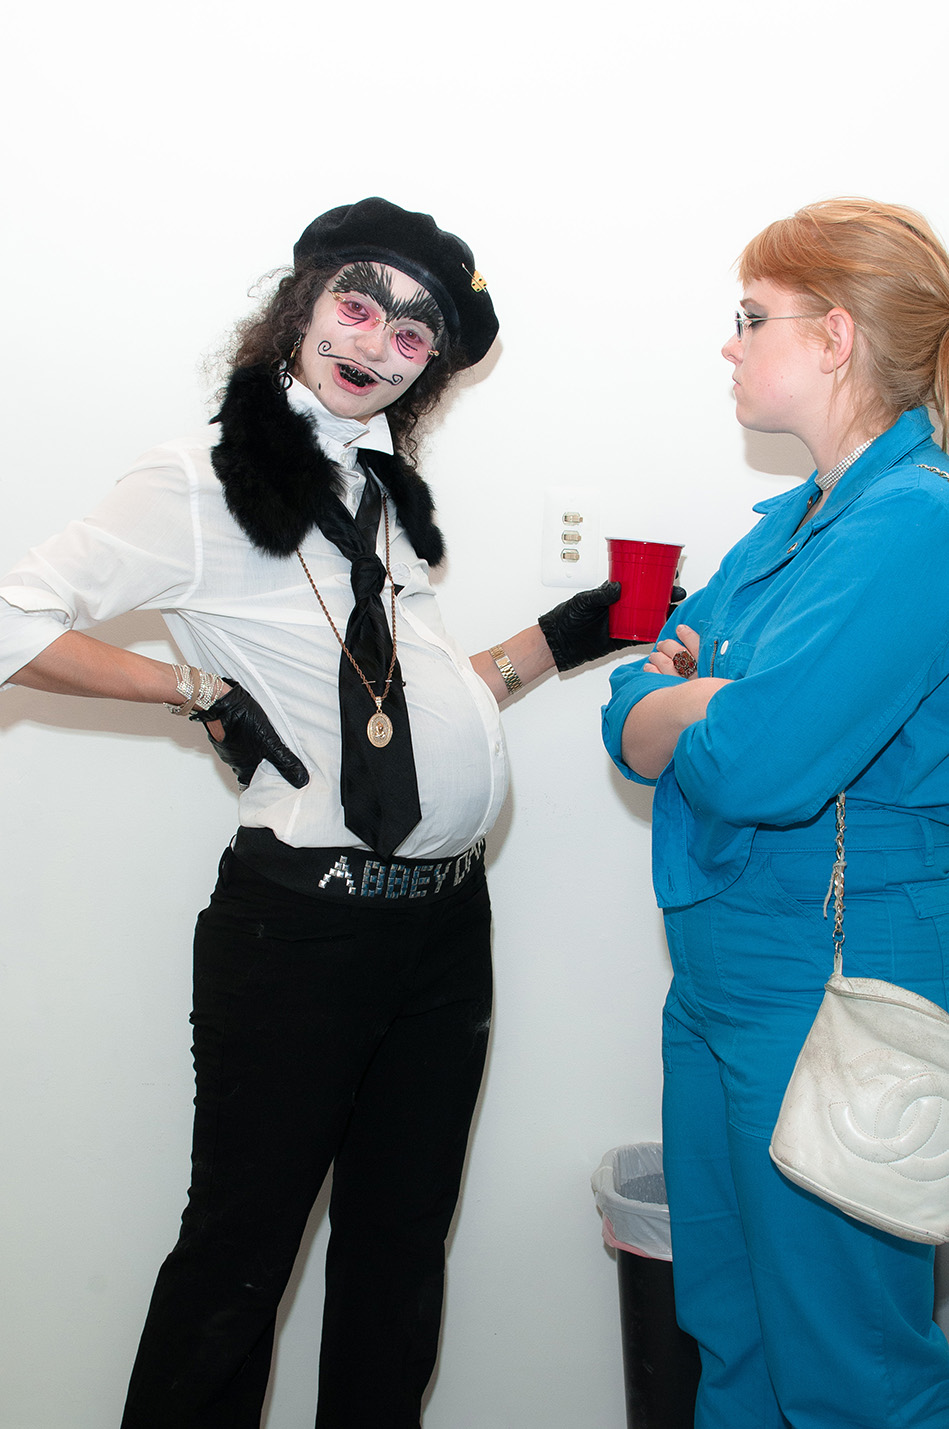 A pregnant figure with a drawn on mustache and unibrow and blacked out teeth faces the camera